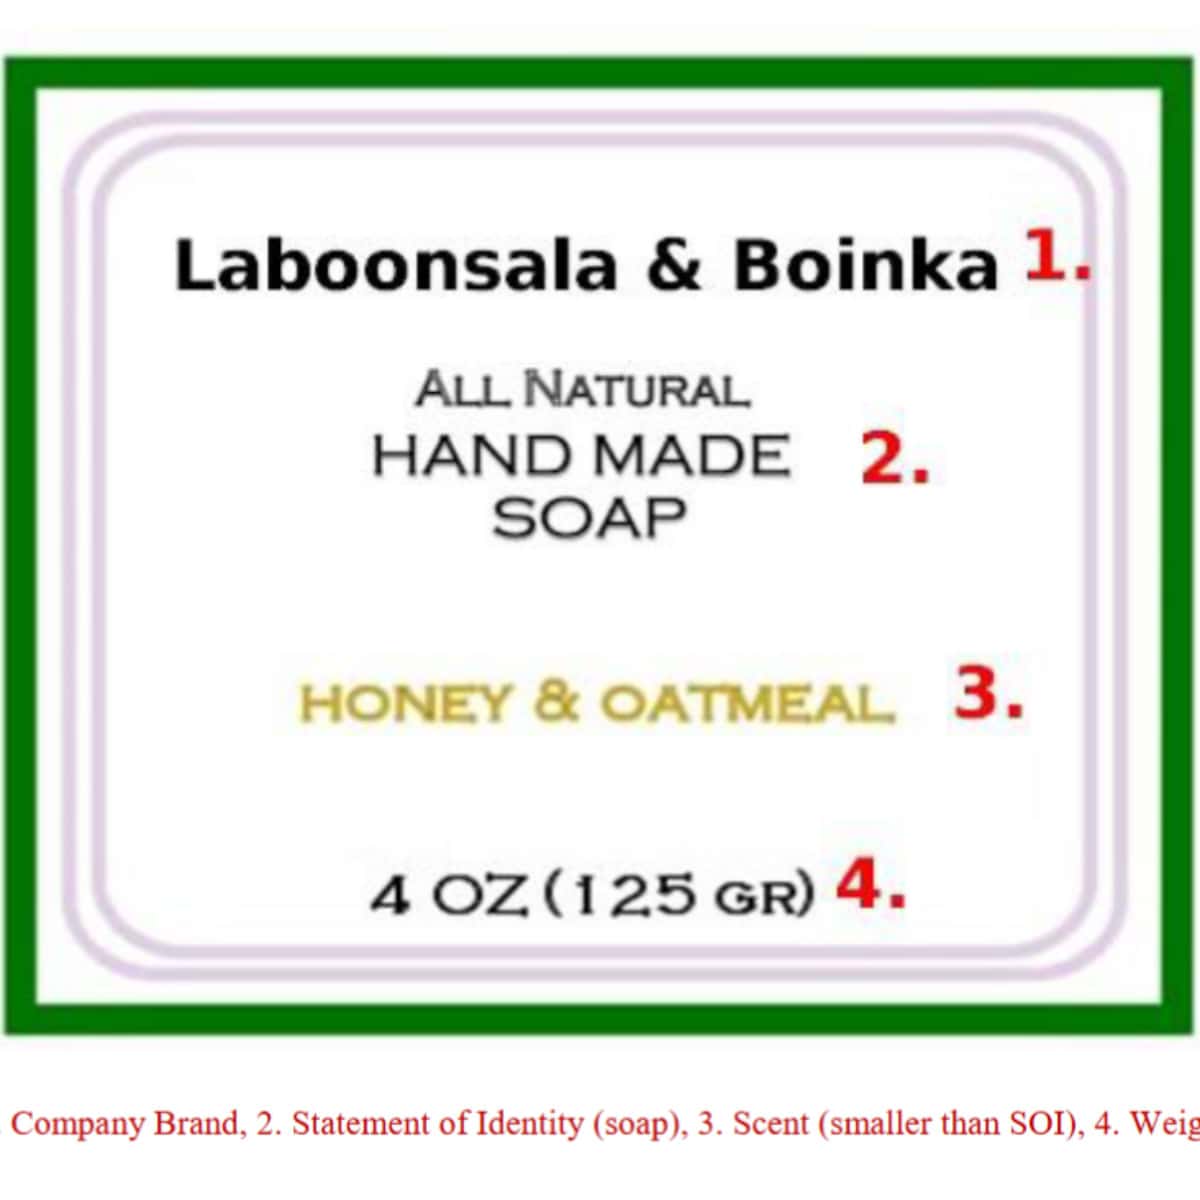 Primary display panel information placement for a natural soap label.